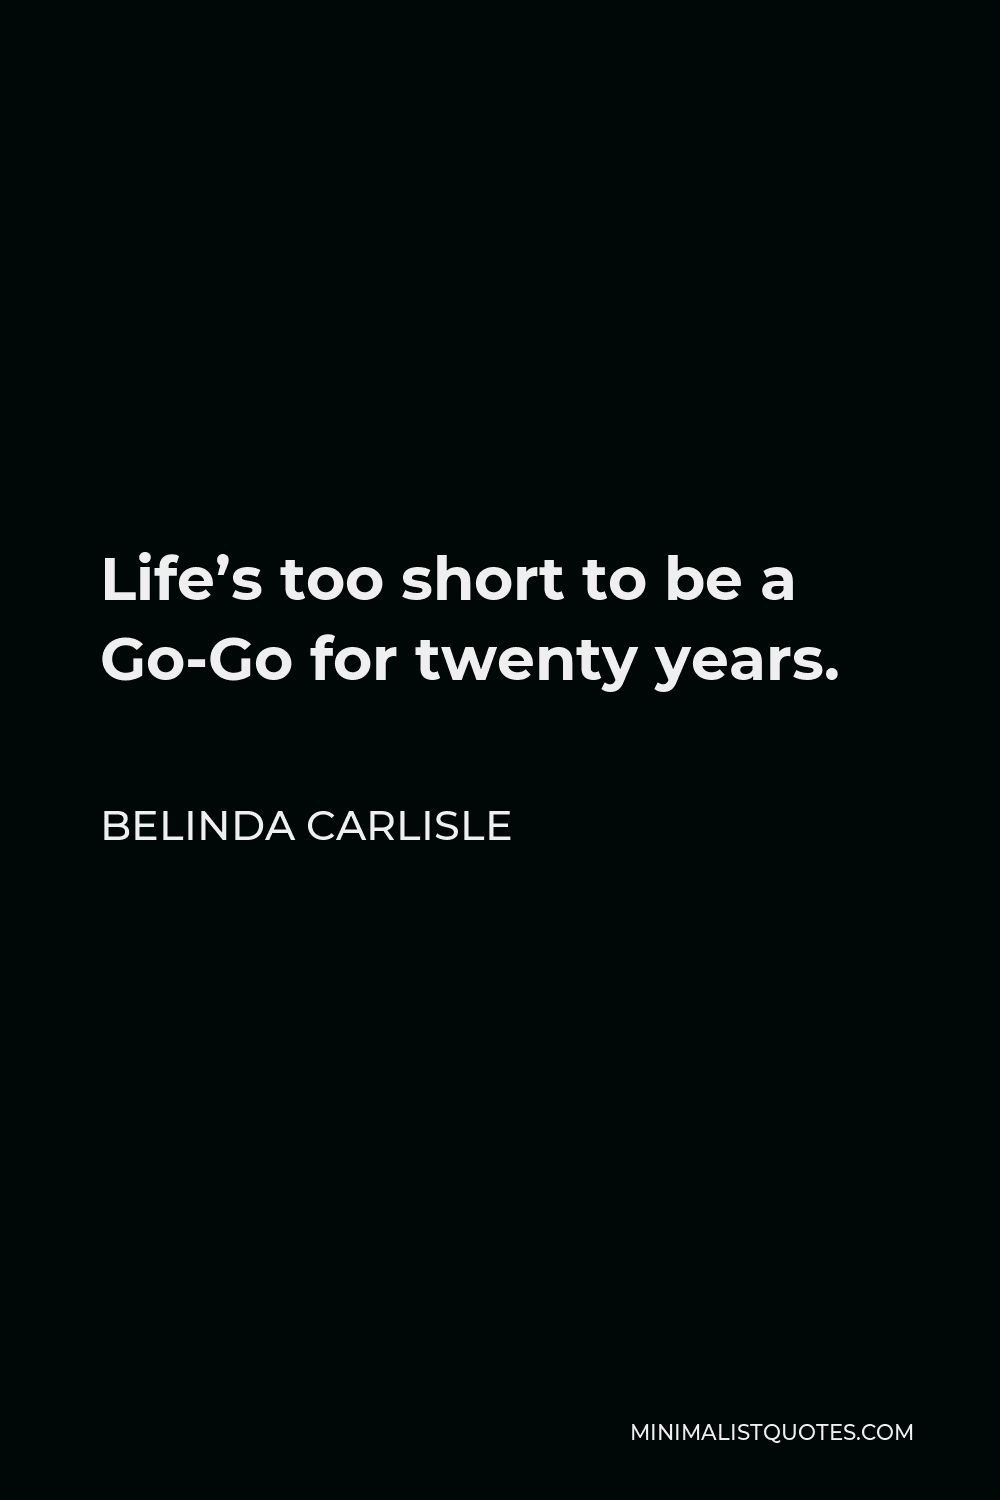 Belinda Carlisle Quote - Life’s too short to be a Go-Go for twenty years.